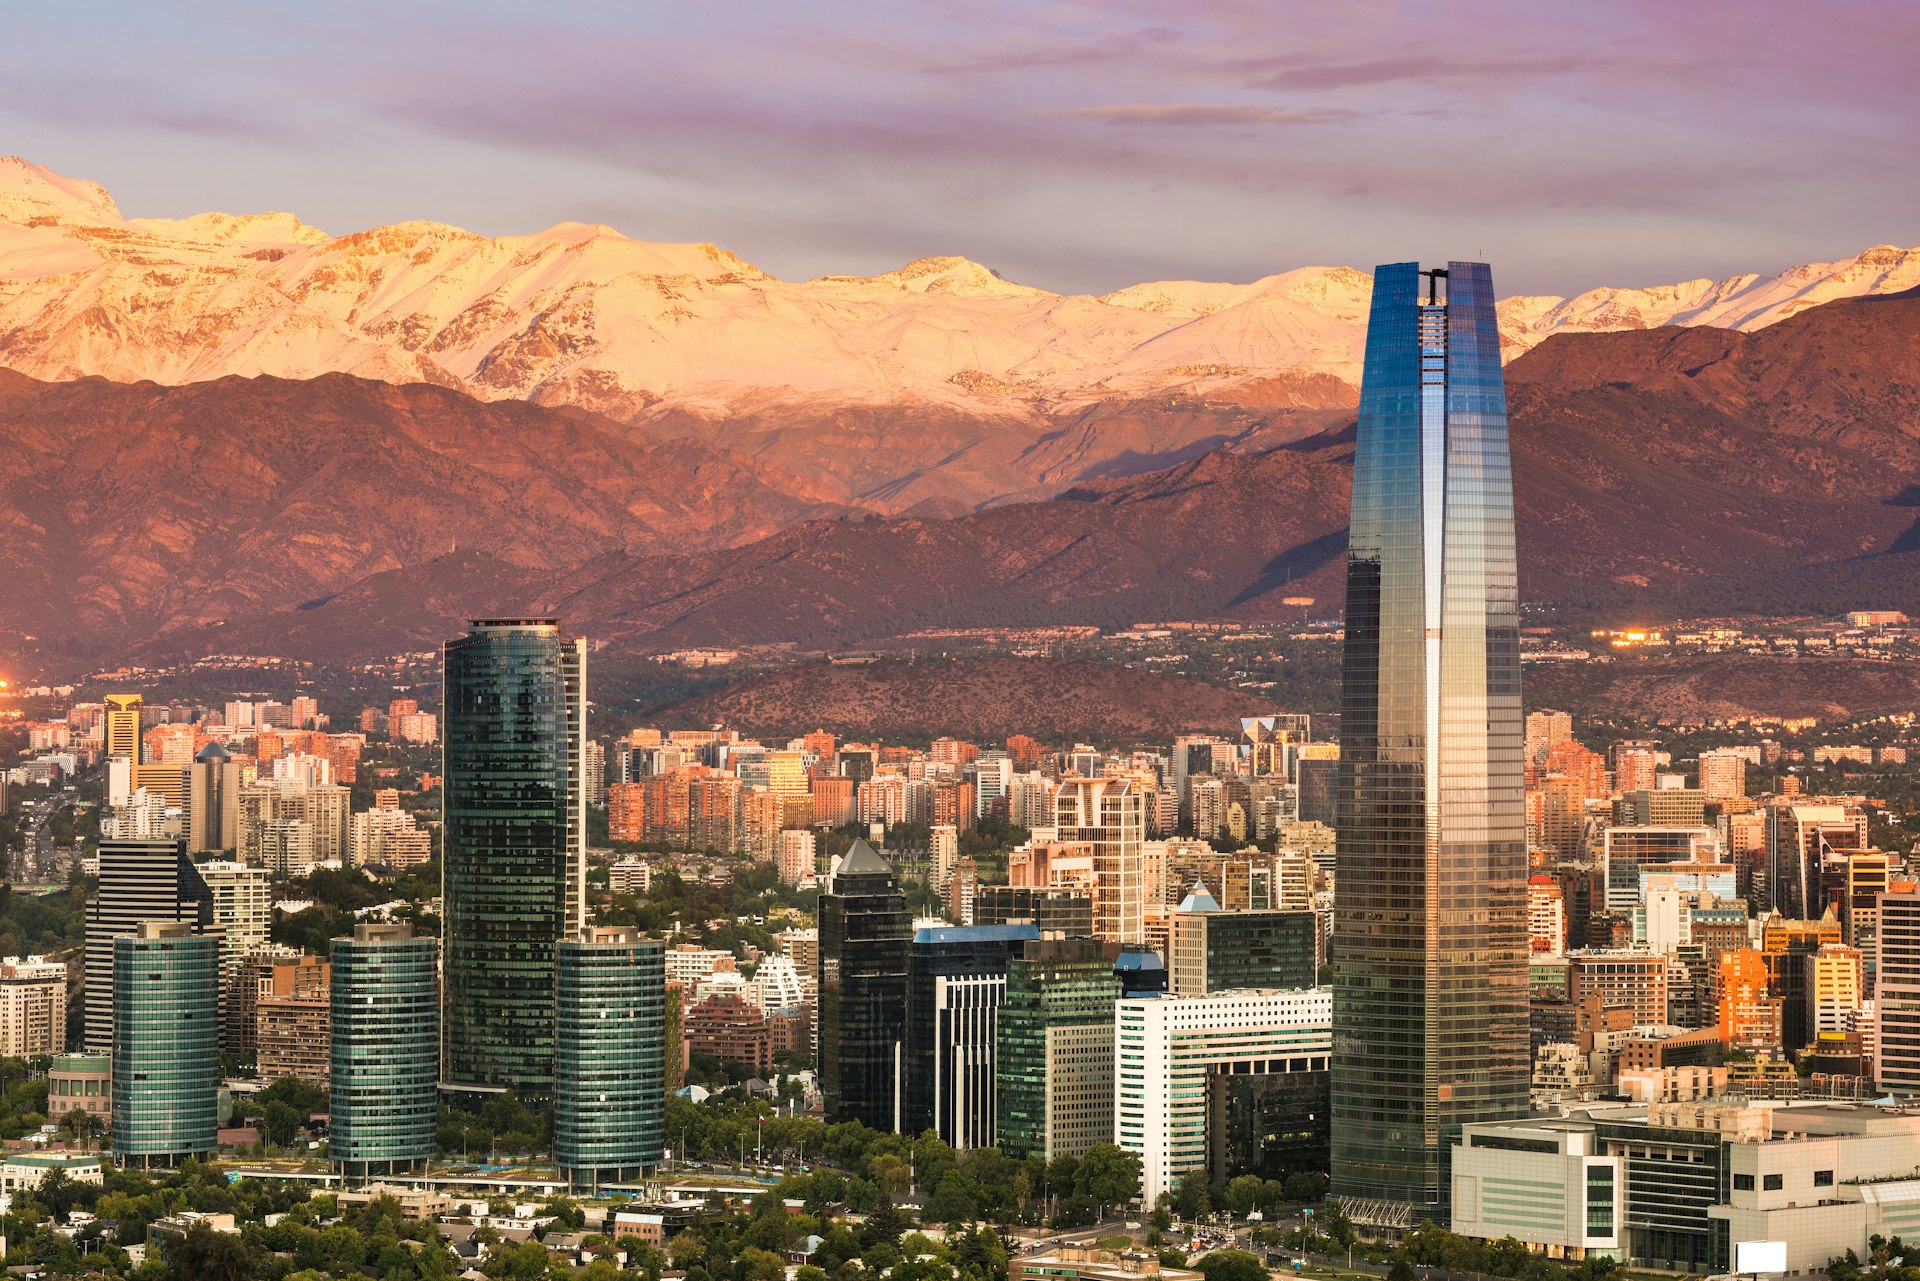 View of Santiago, Chile, at sunset